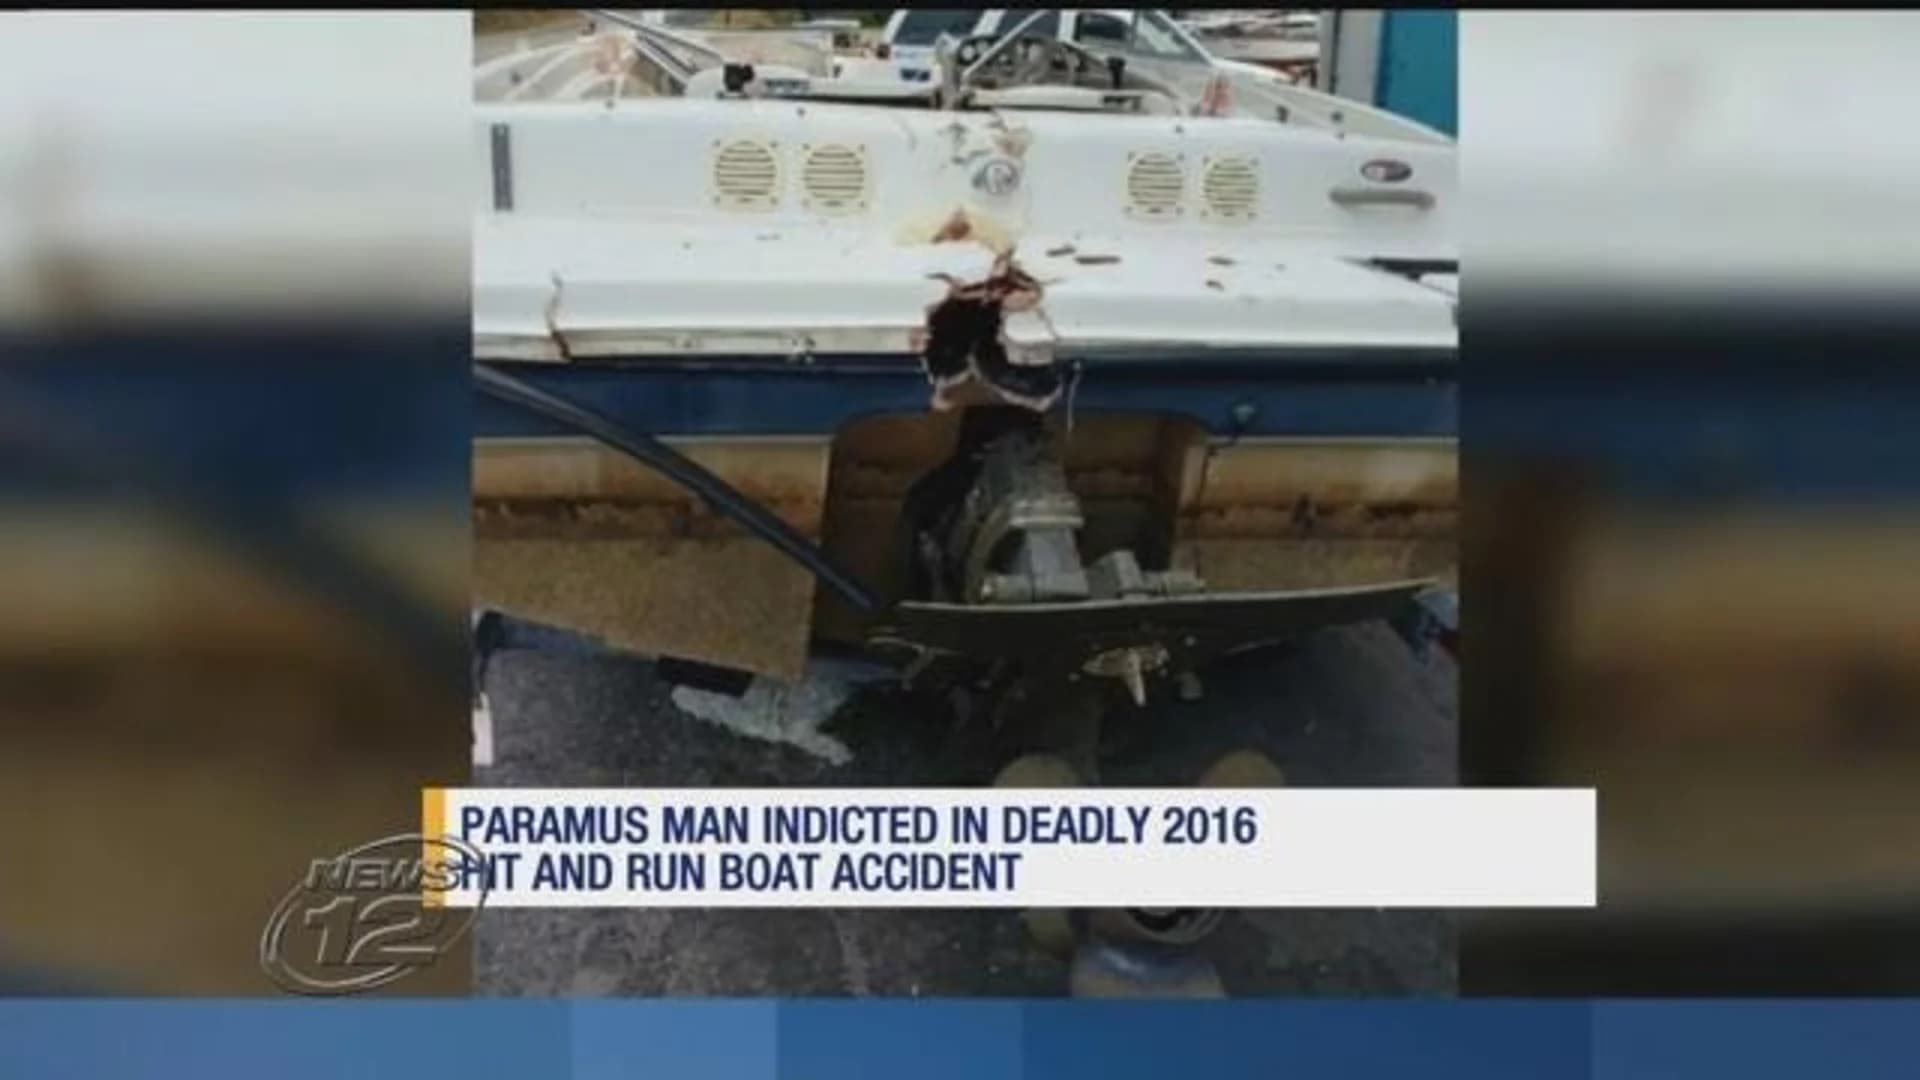 Paramus man pleads not guilty in deadly 2016 hit-and-run boat crash